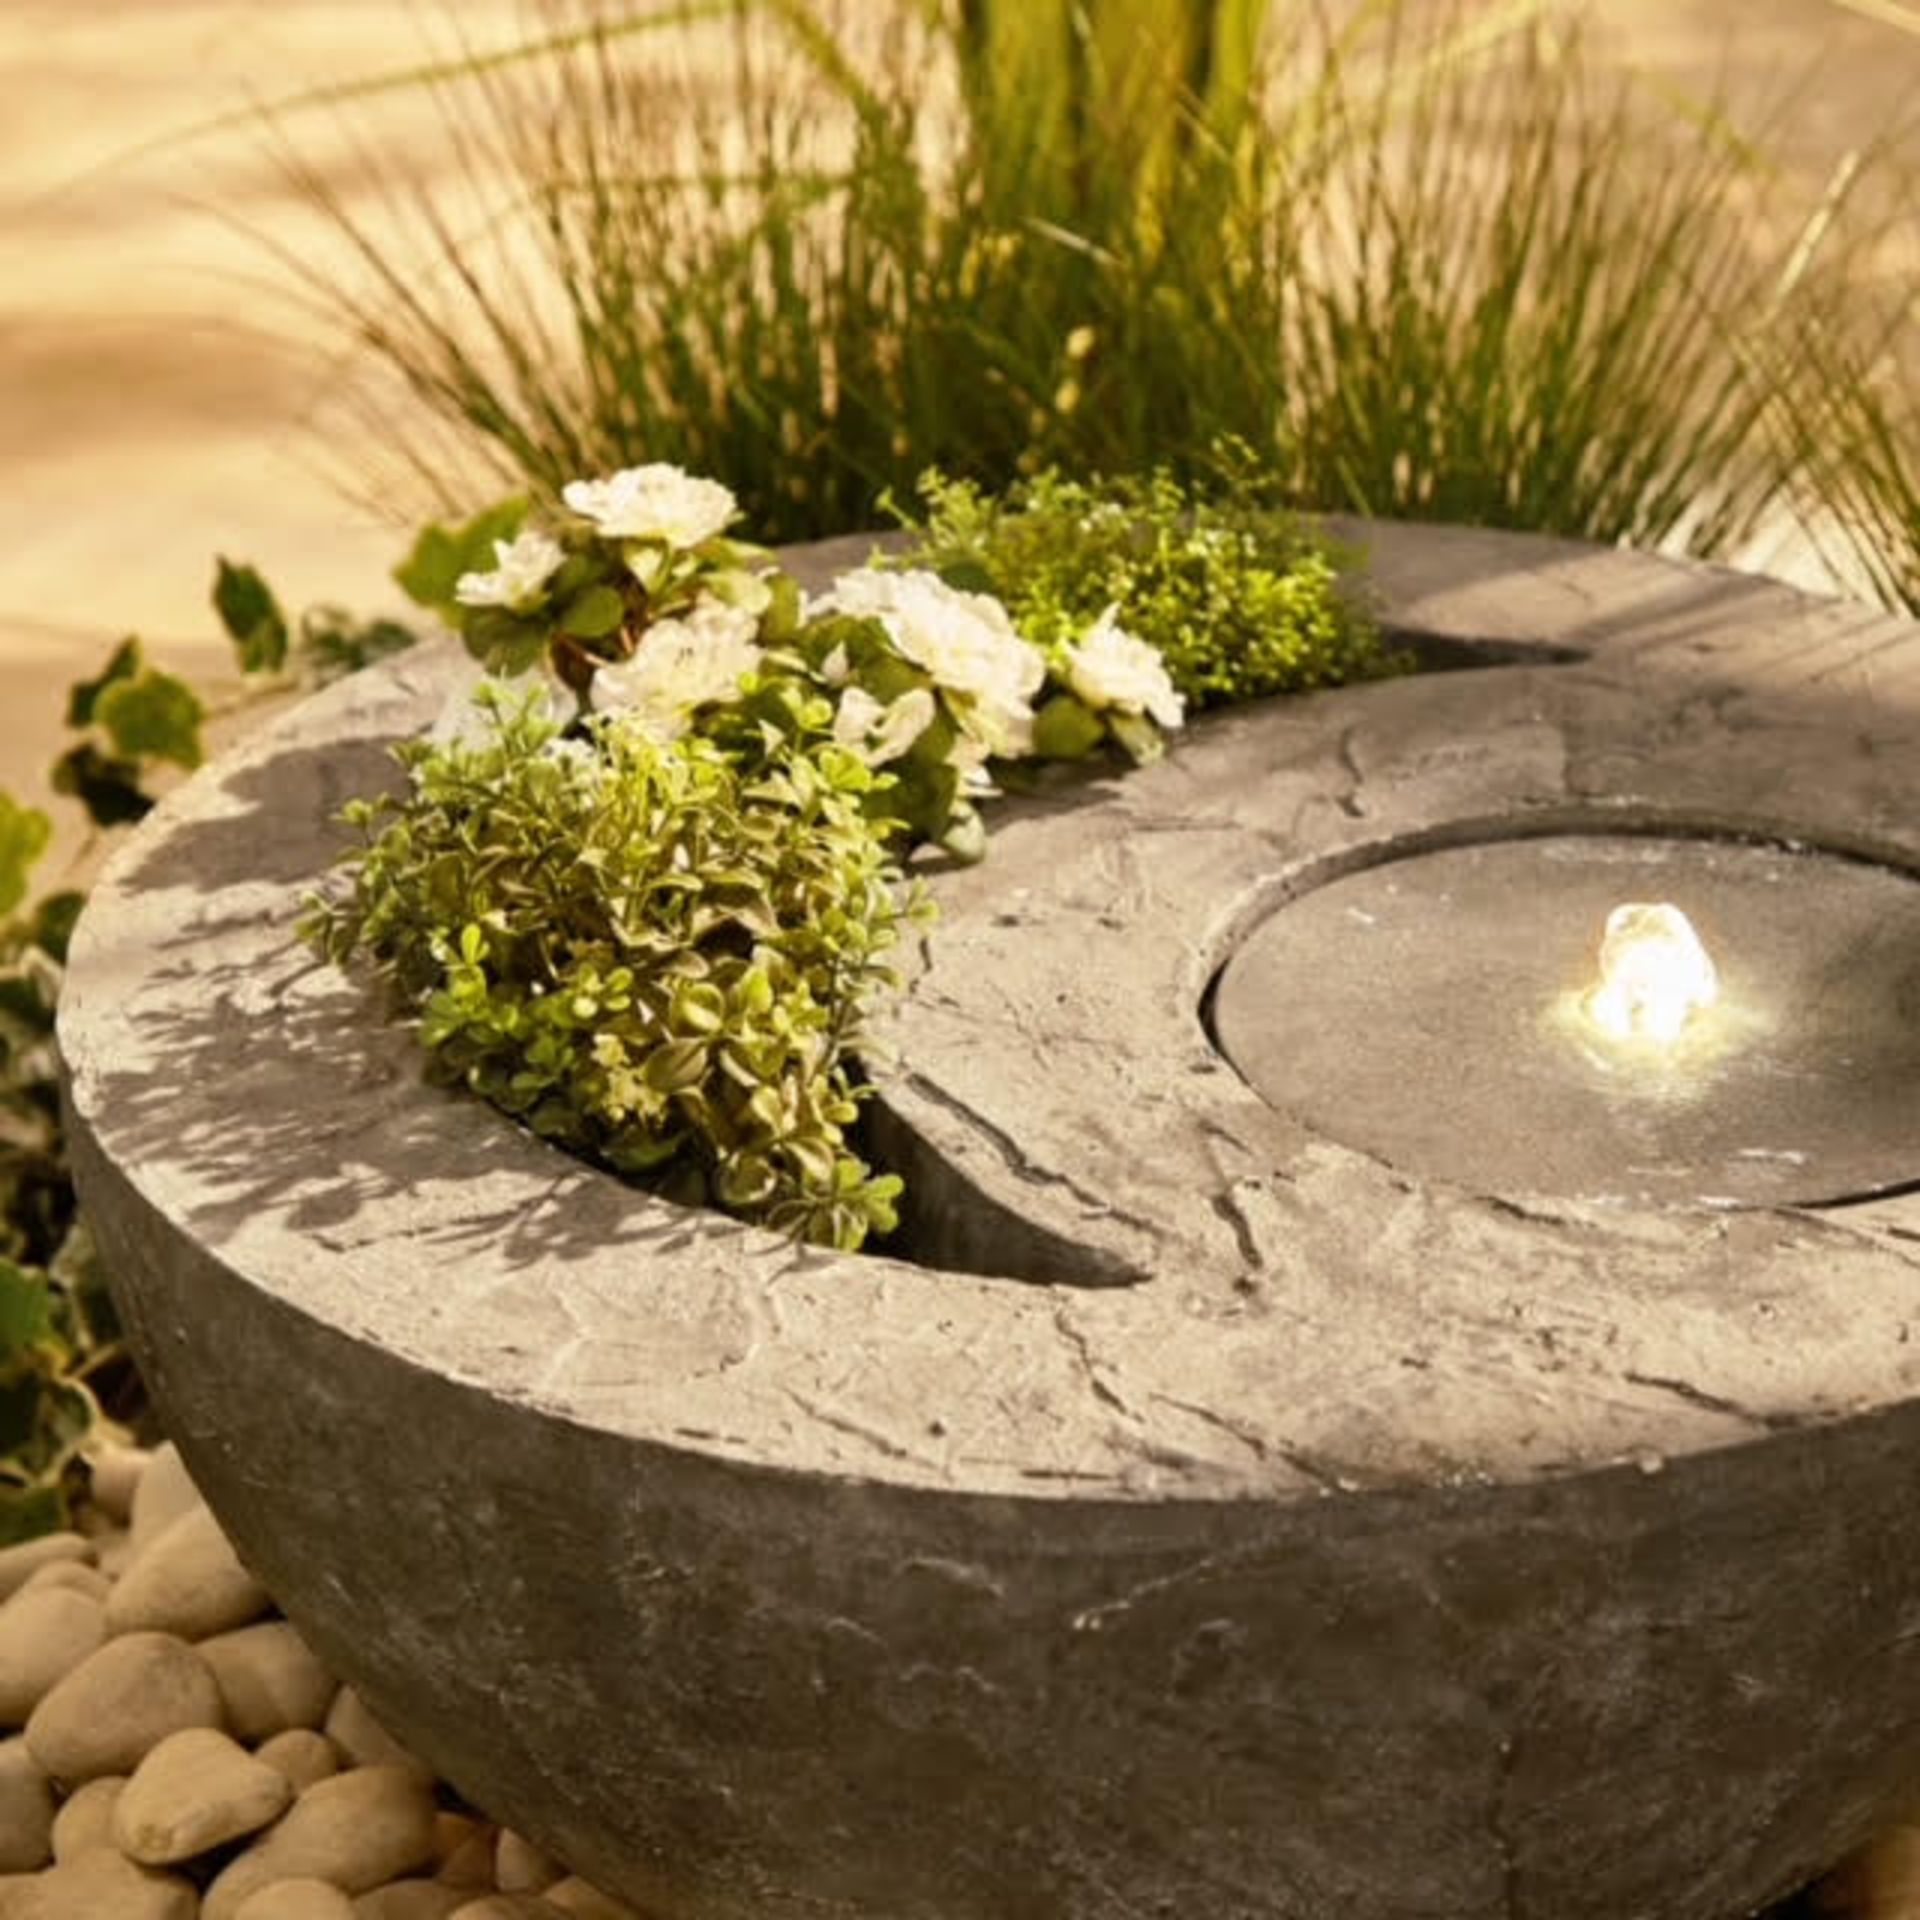 Trade Lot 5 x New & Boxed Dual Water Feature and Planter. RRP £299.99 (REF726) - Garden Bowl - Image 8 of 8